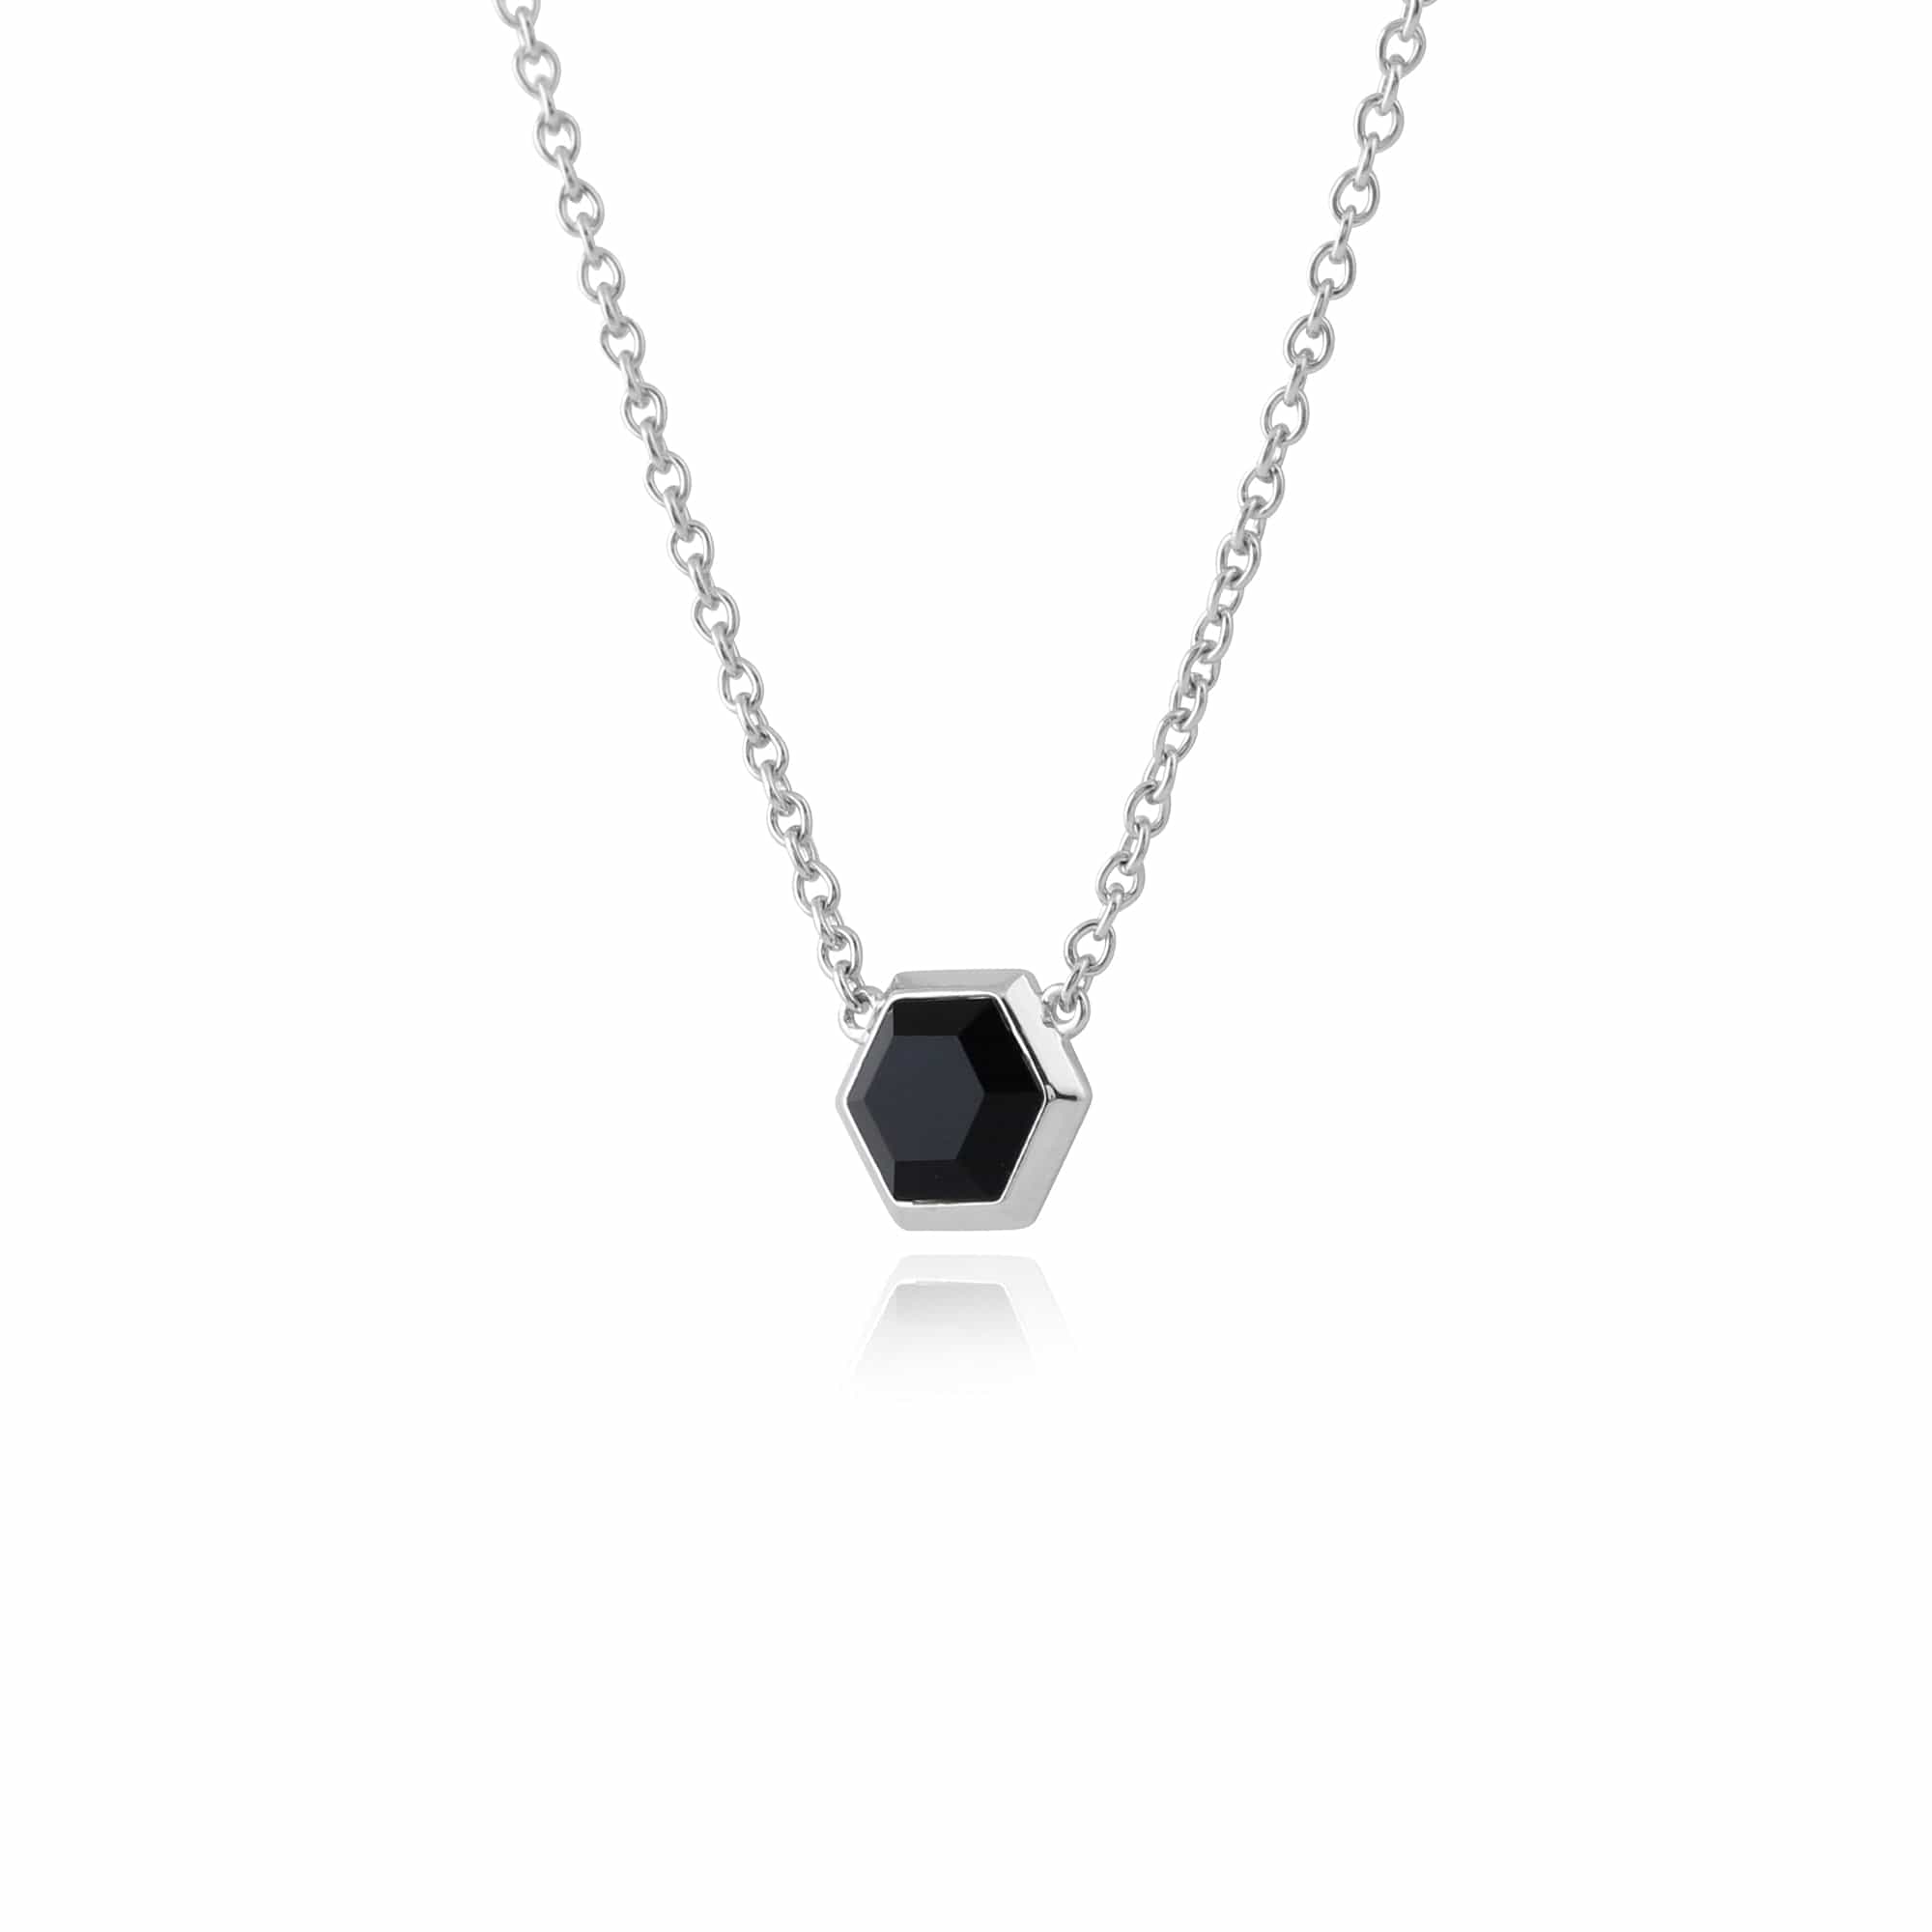 271N012401925 Geometric Hexagon Black Onyx Necklace in 925 Sterling Silver 2